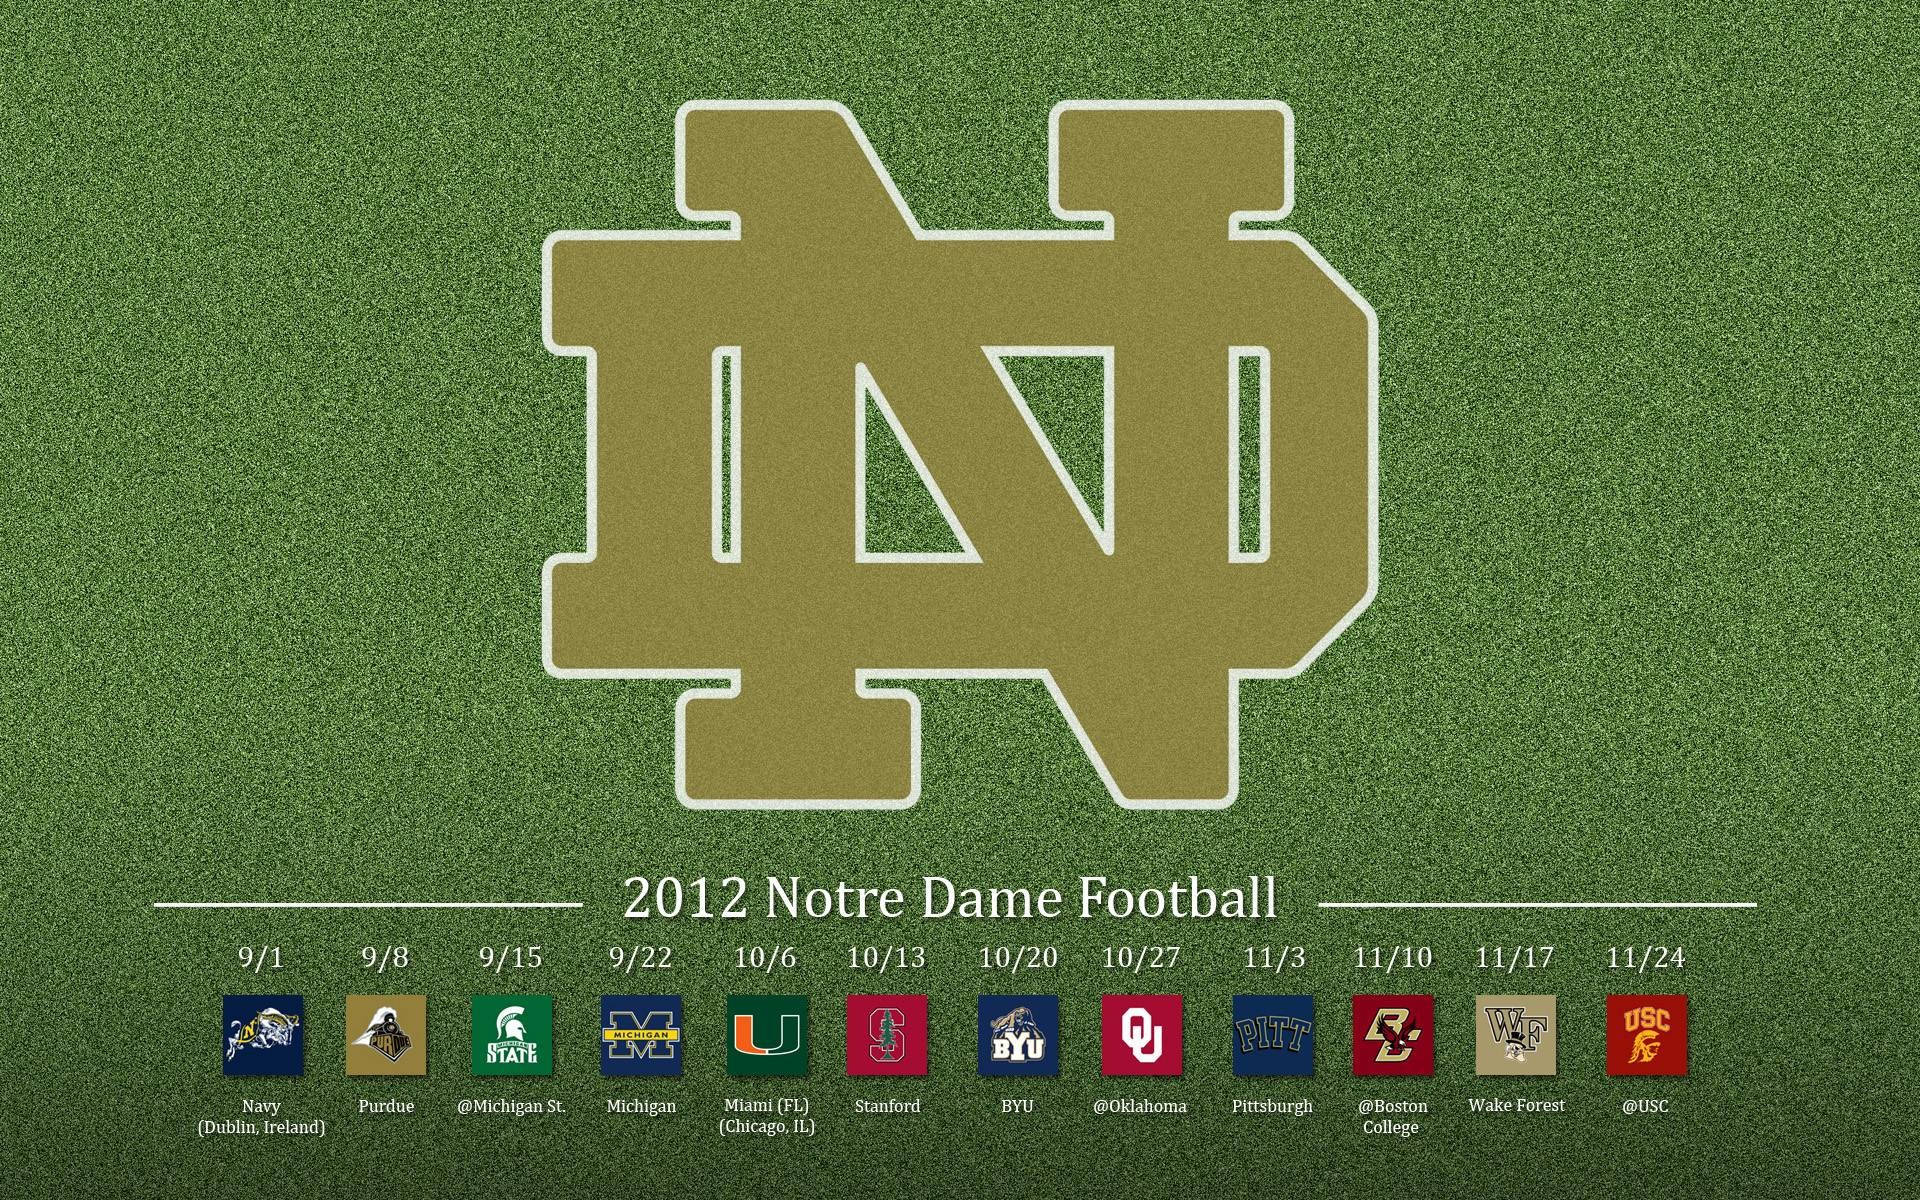 Custom Irish  wallpapers for you on  Notre Dame Football  Facebook